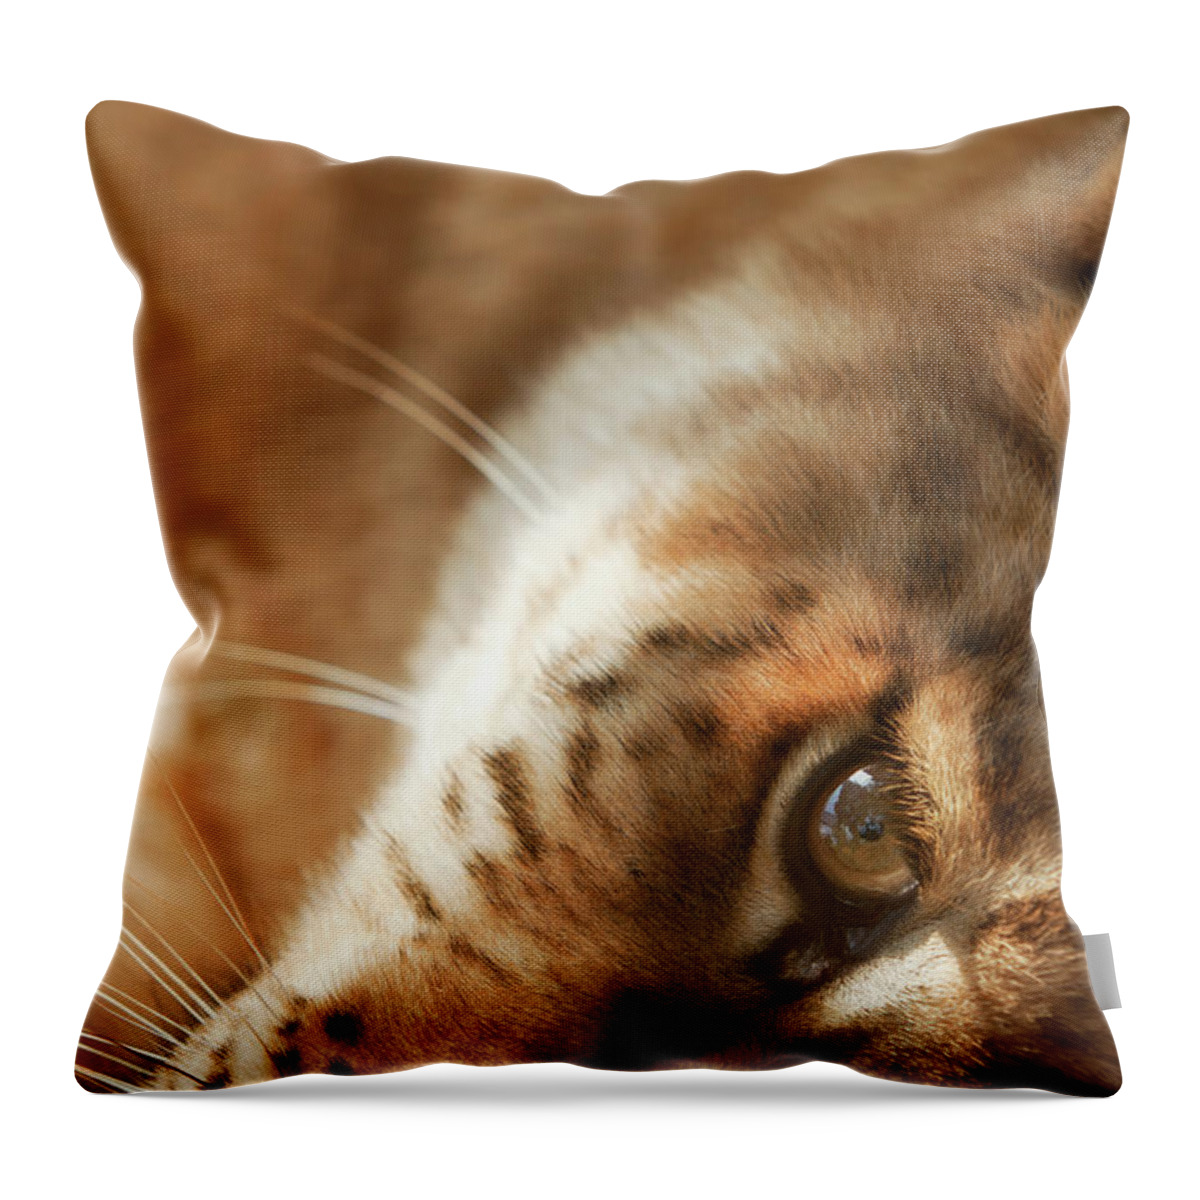 Big Cat Throw Pillow featuring the photograph Liger #1 by Tunart